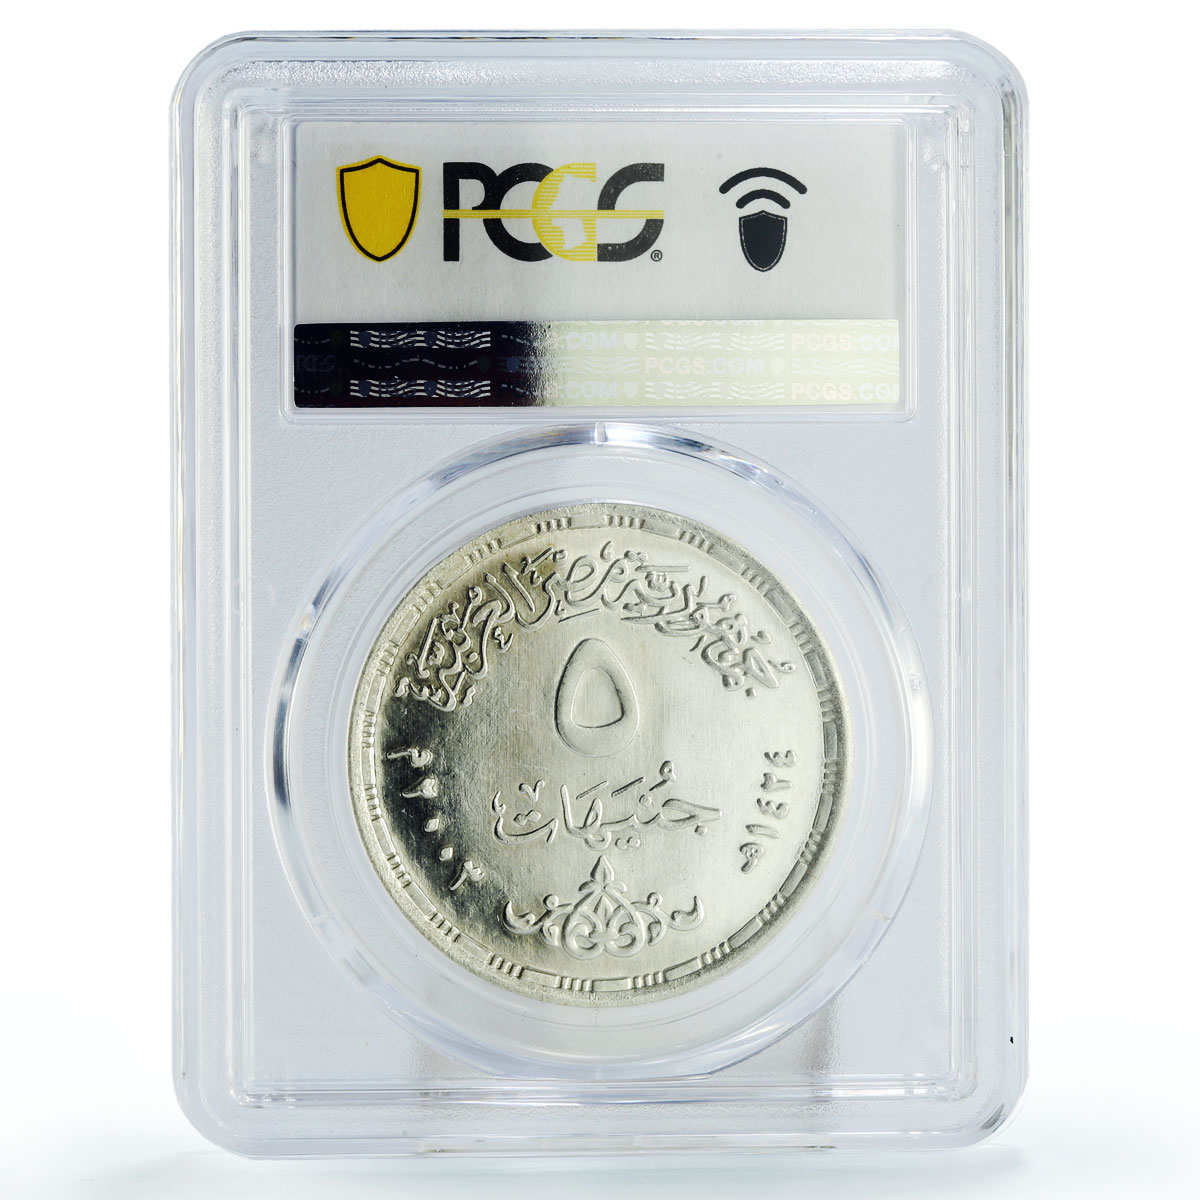 Egypt 5 pounds Geo Physical Institute University MS65 PCGS silver coin 2003